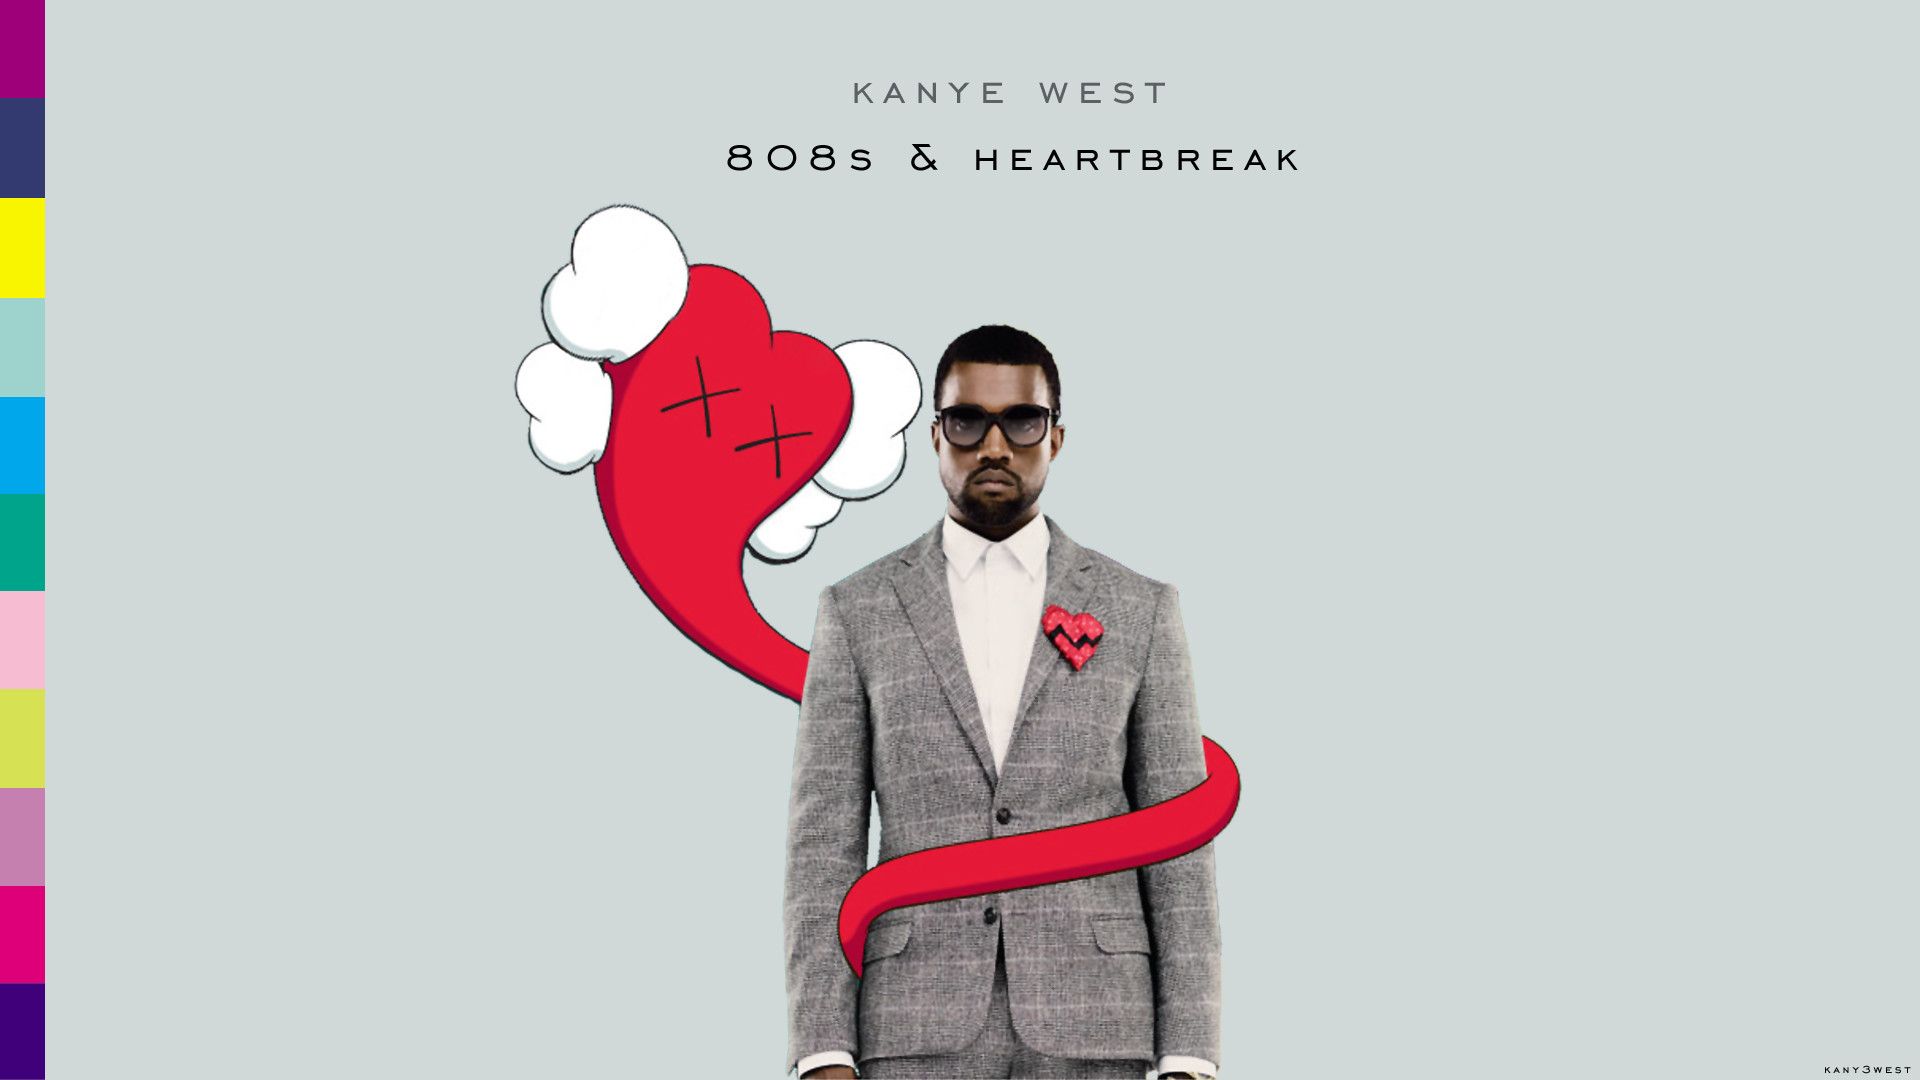 kanye west 808 and heartbreak download